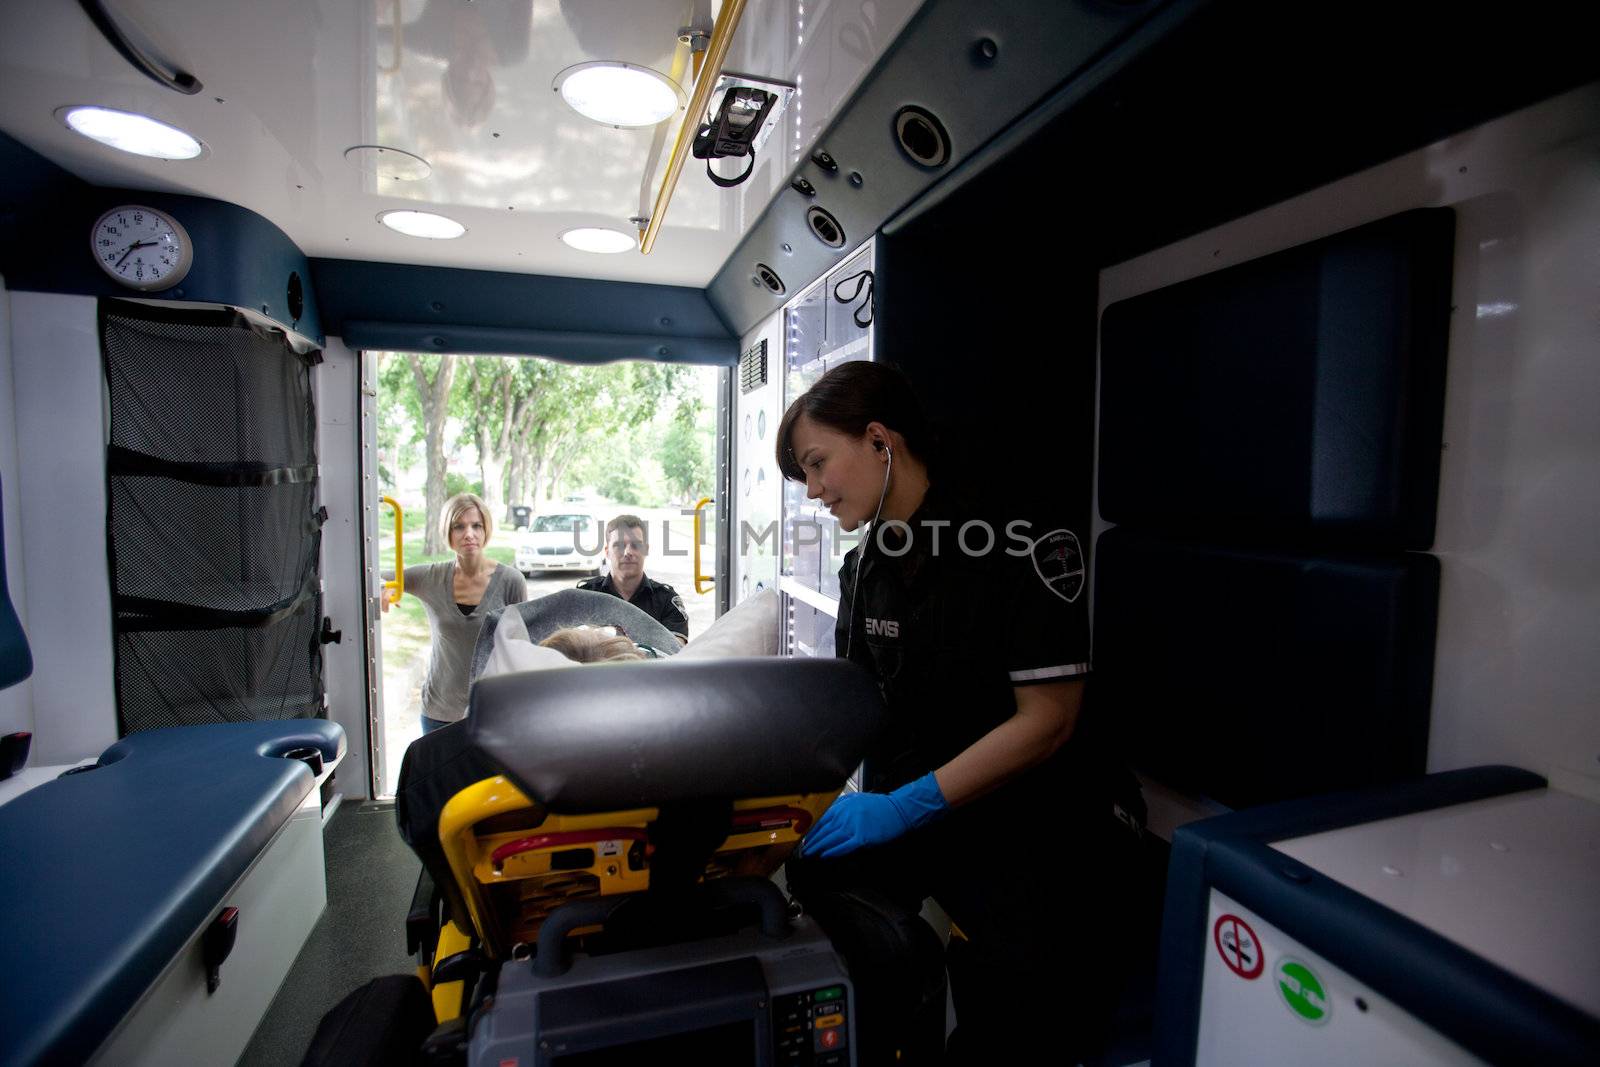 Paramedic tending to an ill patient with ambulance driver and caregiver looking in from rear doors